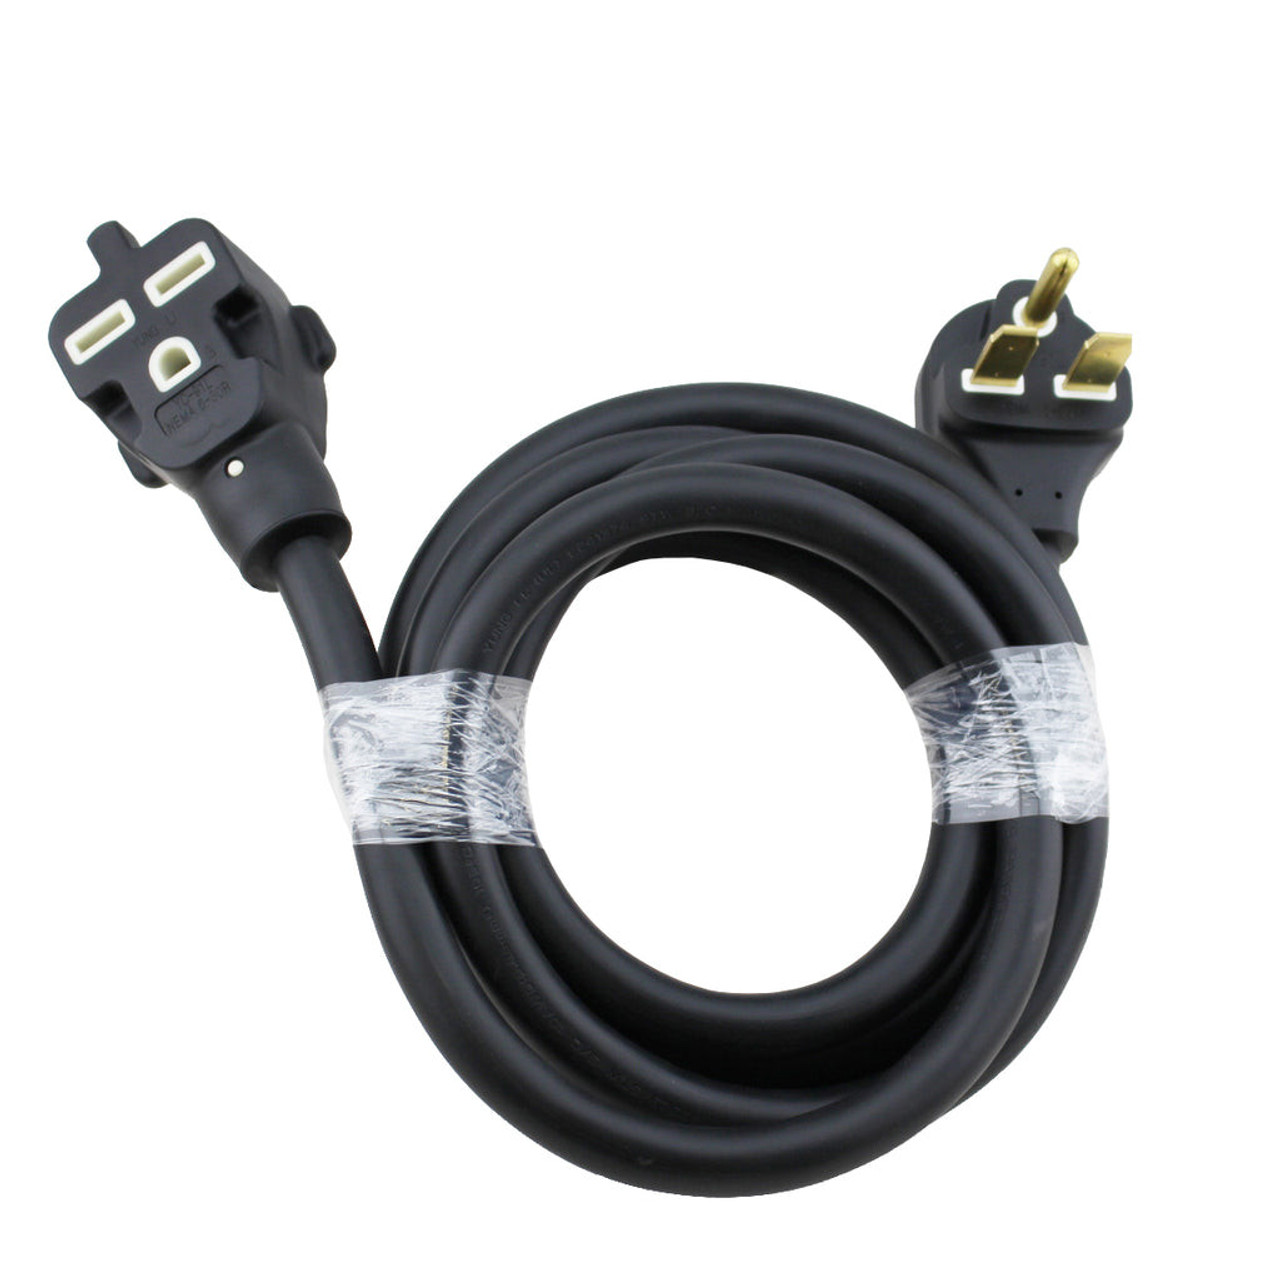 NEMA 6-30 Extension Cord for Level 2 EV Charging (30A, 250V) -  www.